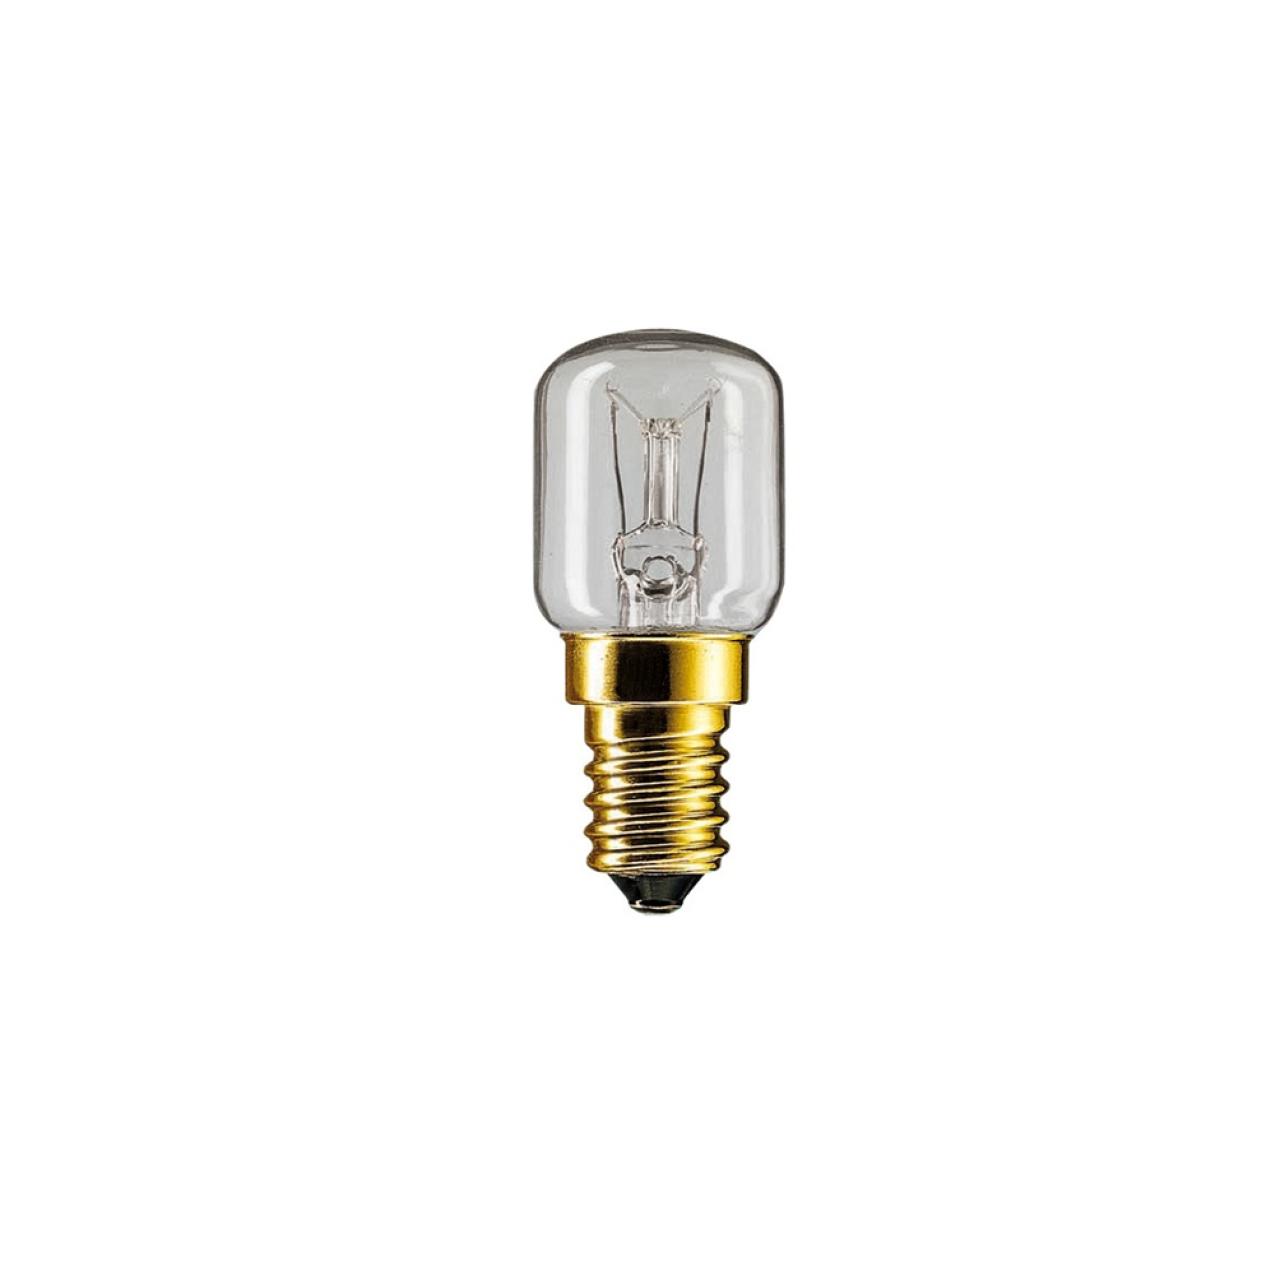 PHILIPS Glühlampe E14, 25 W, 172 lm, dimmbar